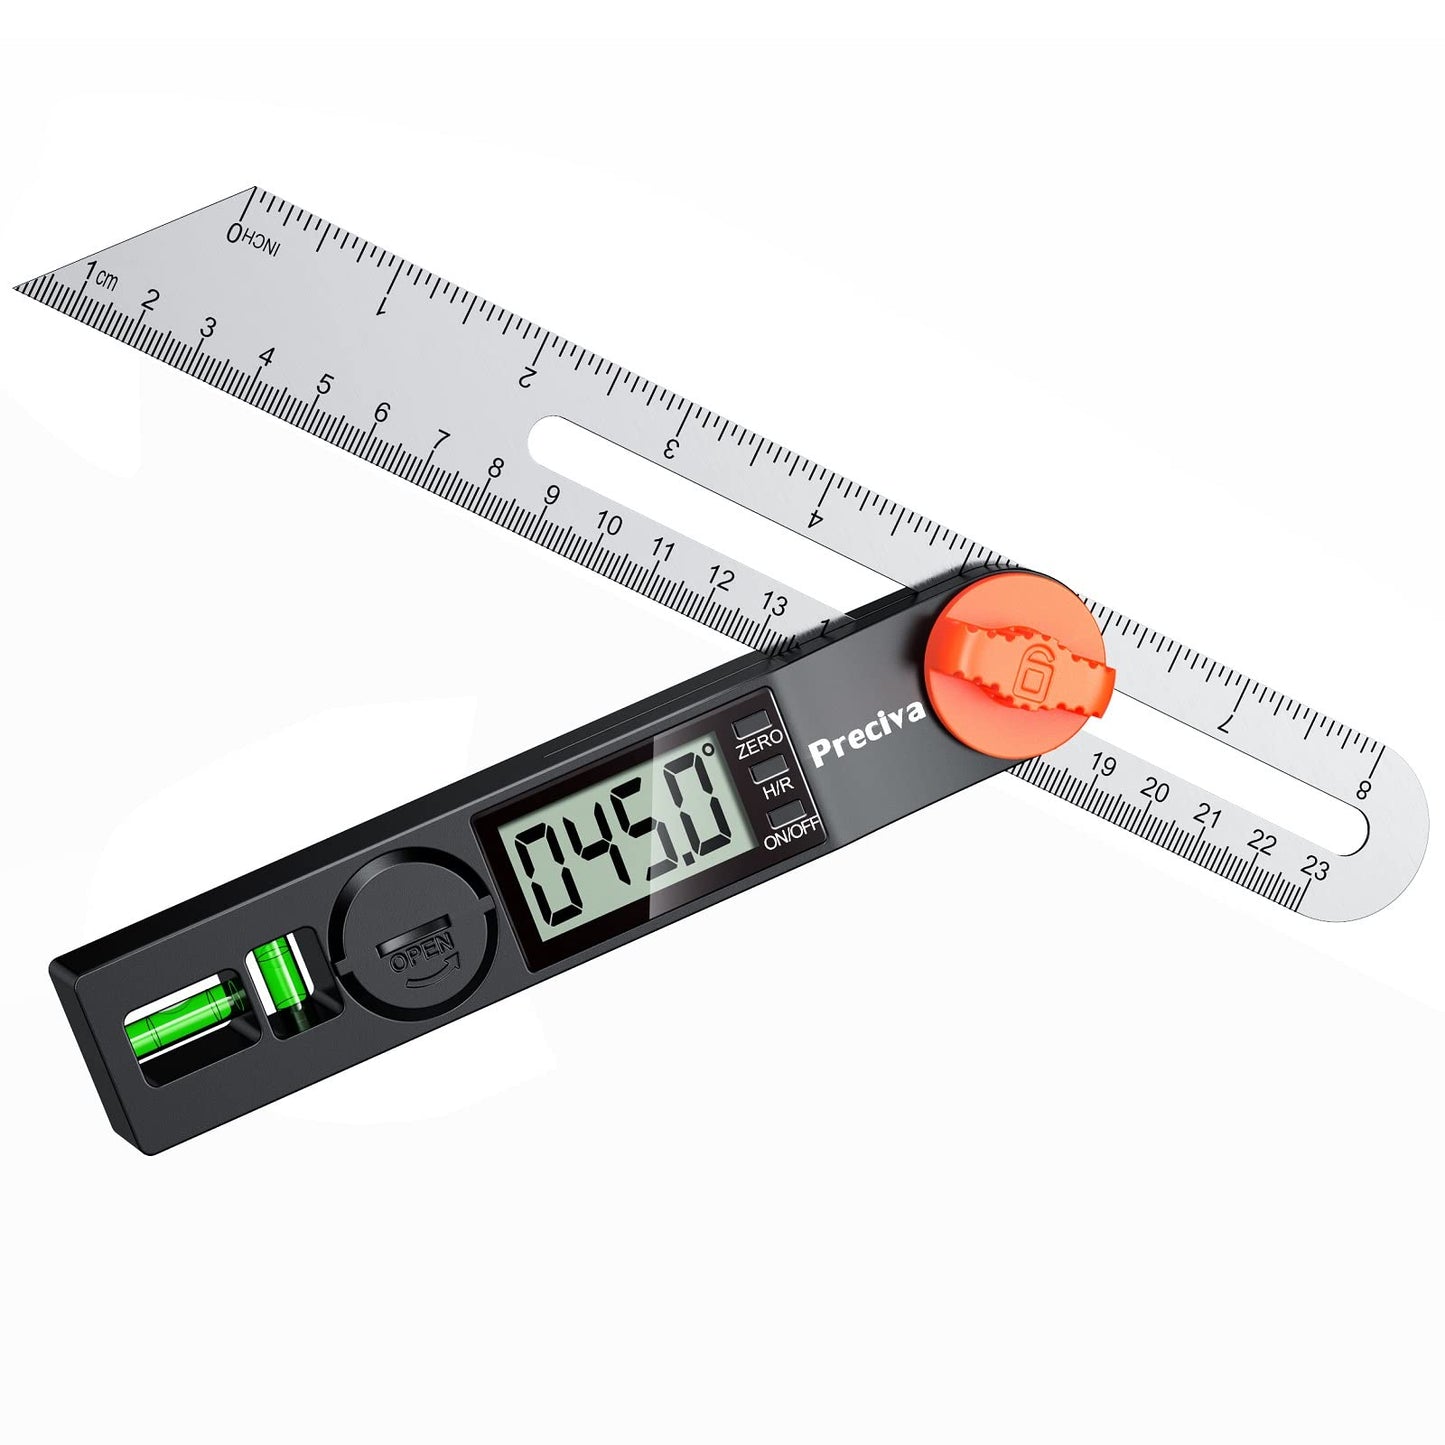 Preciva T-Bevel Gauge & Protractor with Horizontal and Vertical Bubble,0-338° Digital Angle Finder Protractor 230mm/8inch Display for Carpentry